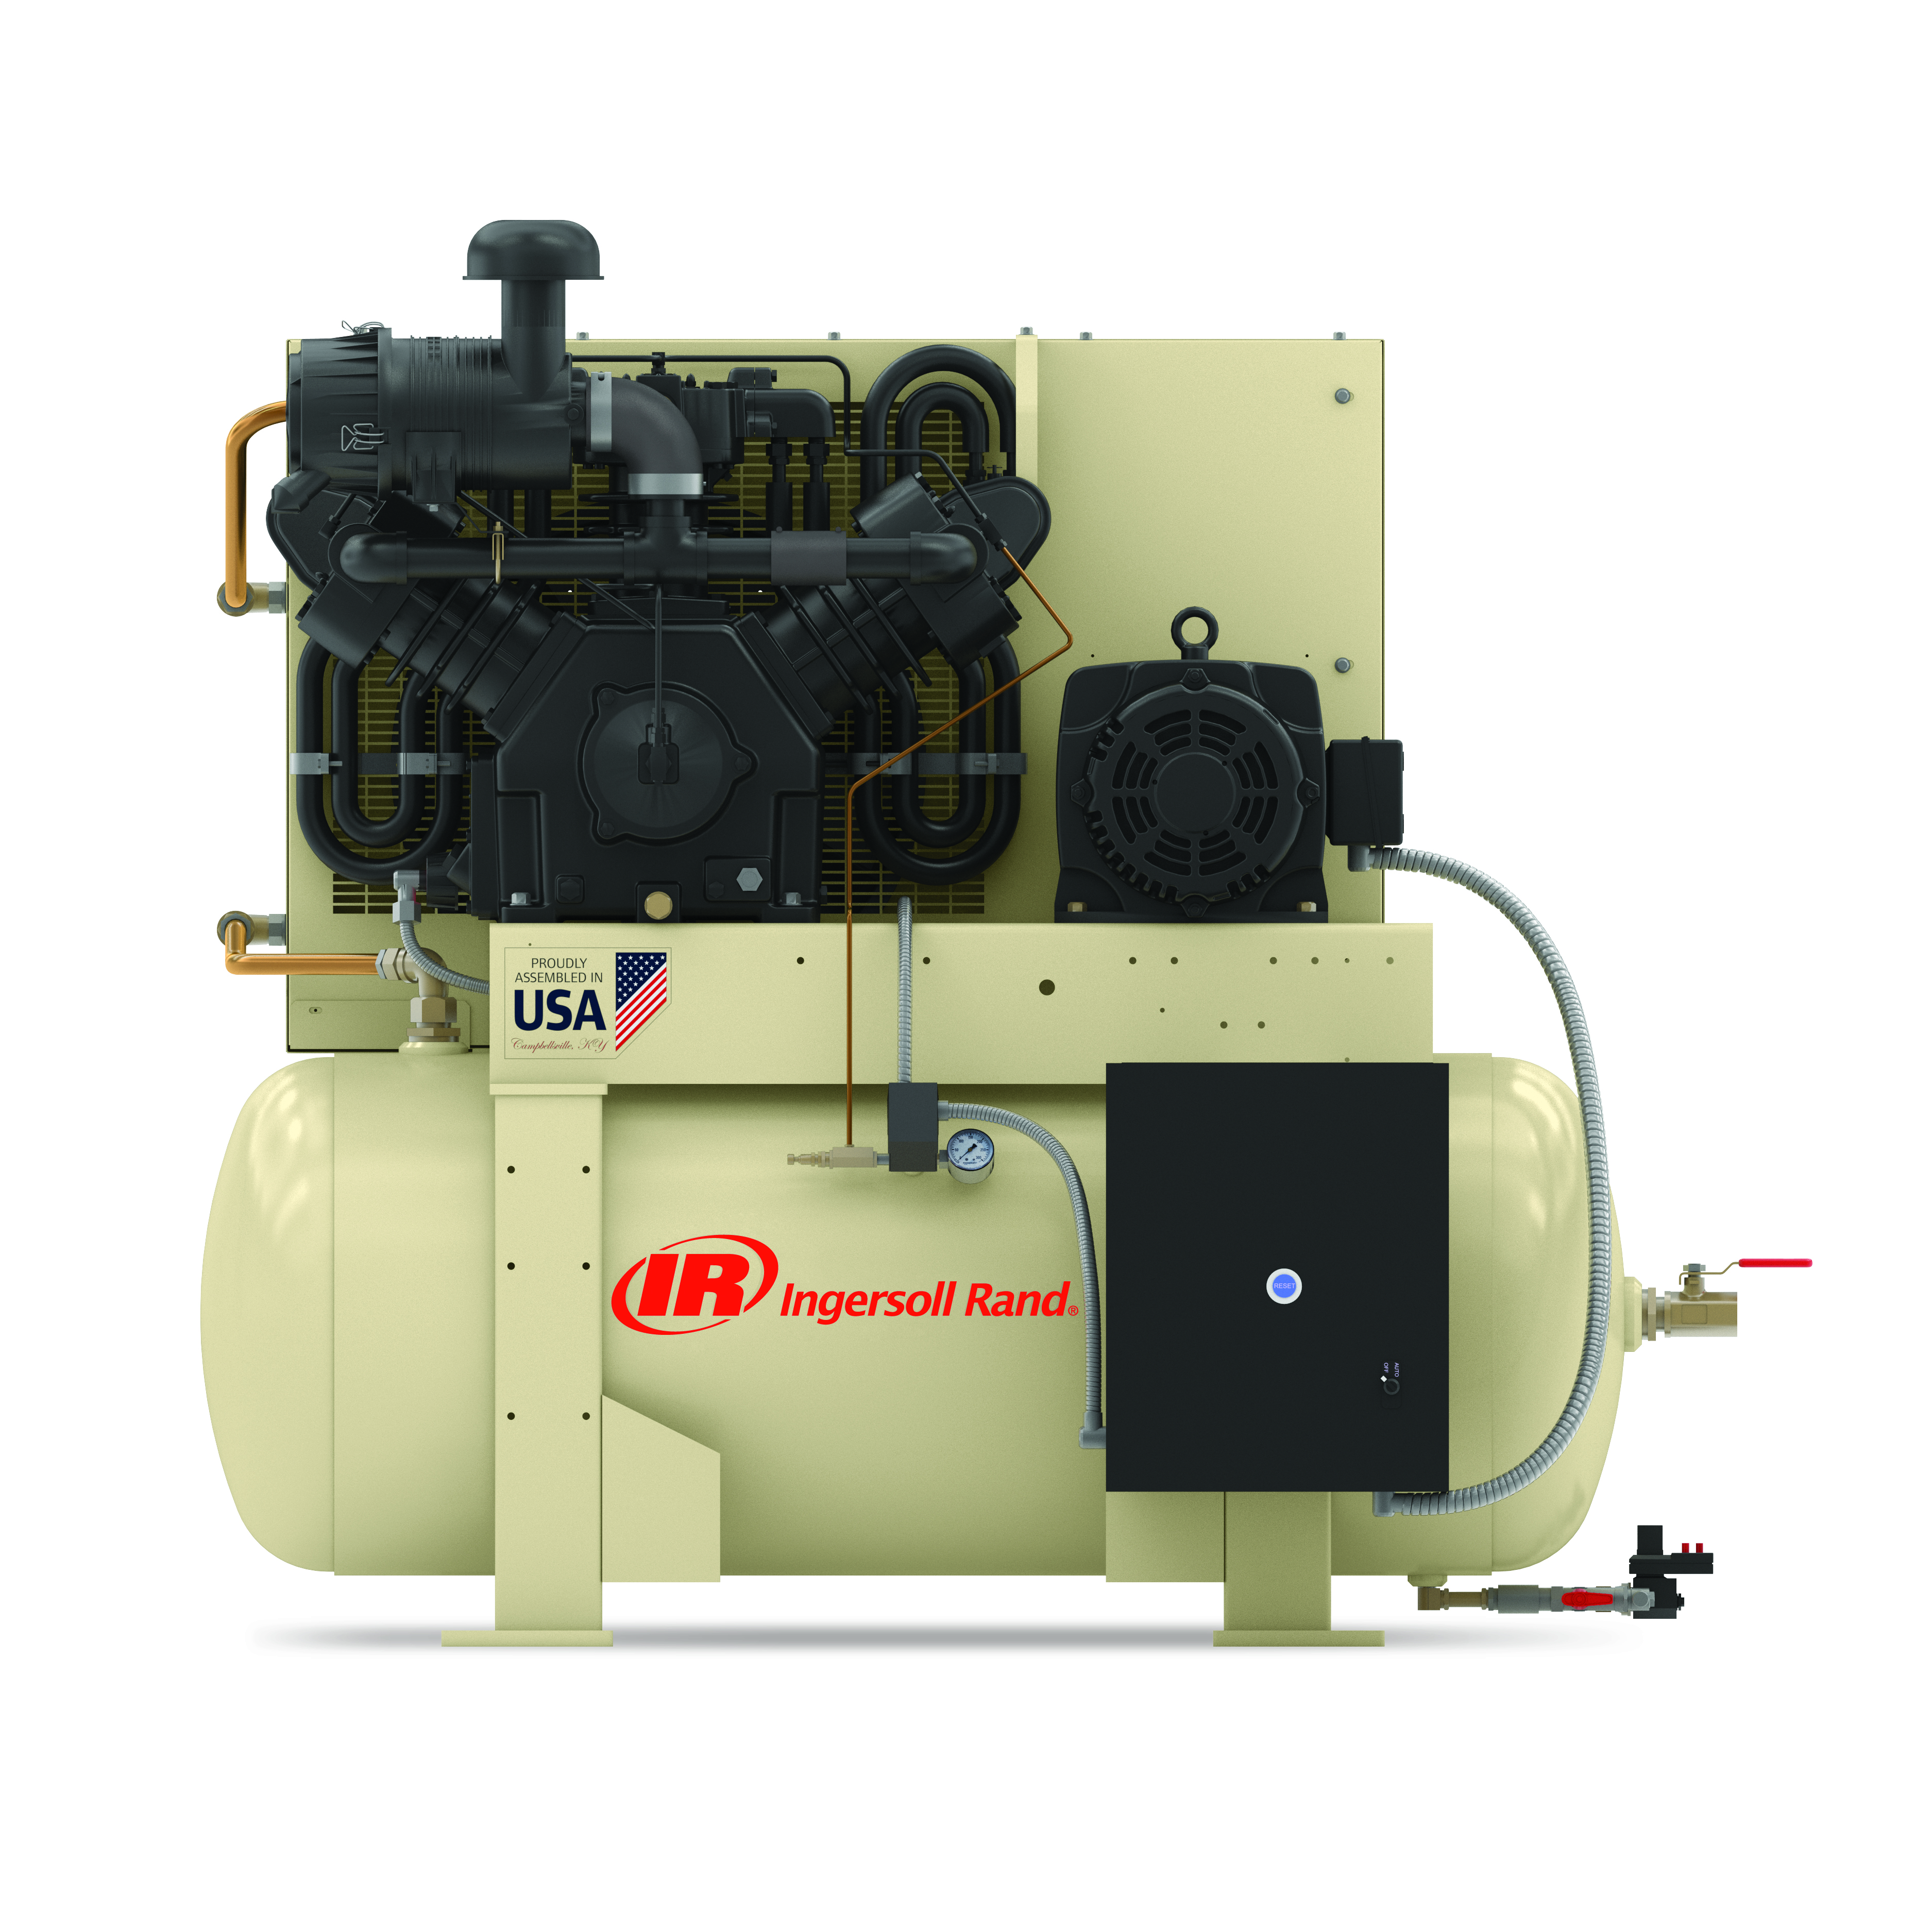 Ingersoll Rand 3000 Two-Stage Piston Air Compressor Pump